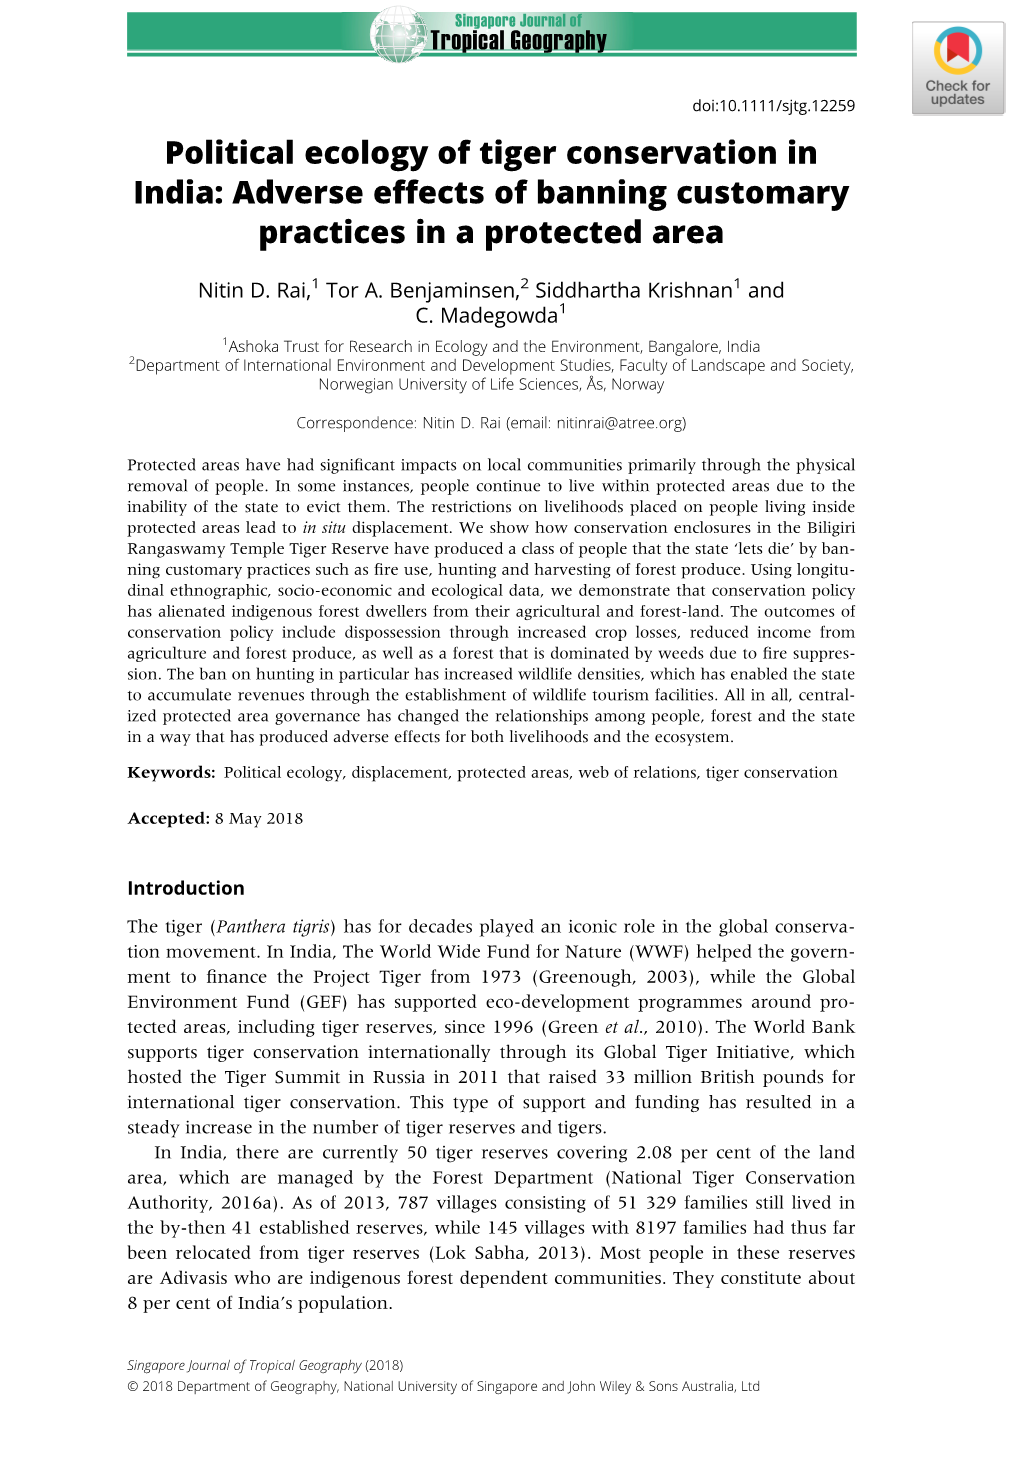 Political Ecology of Tiger Conservation in India: Adverse Effects of Banning Customary Practices in a Protected Area